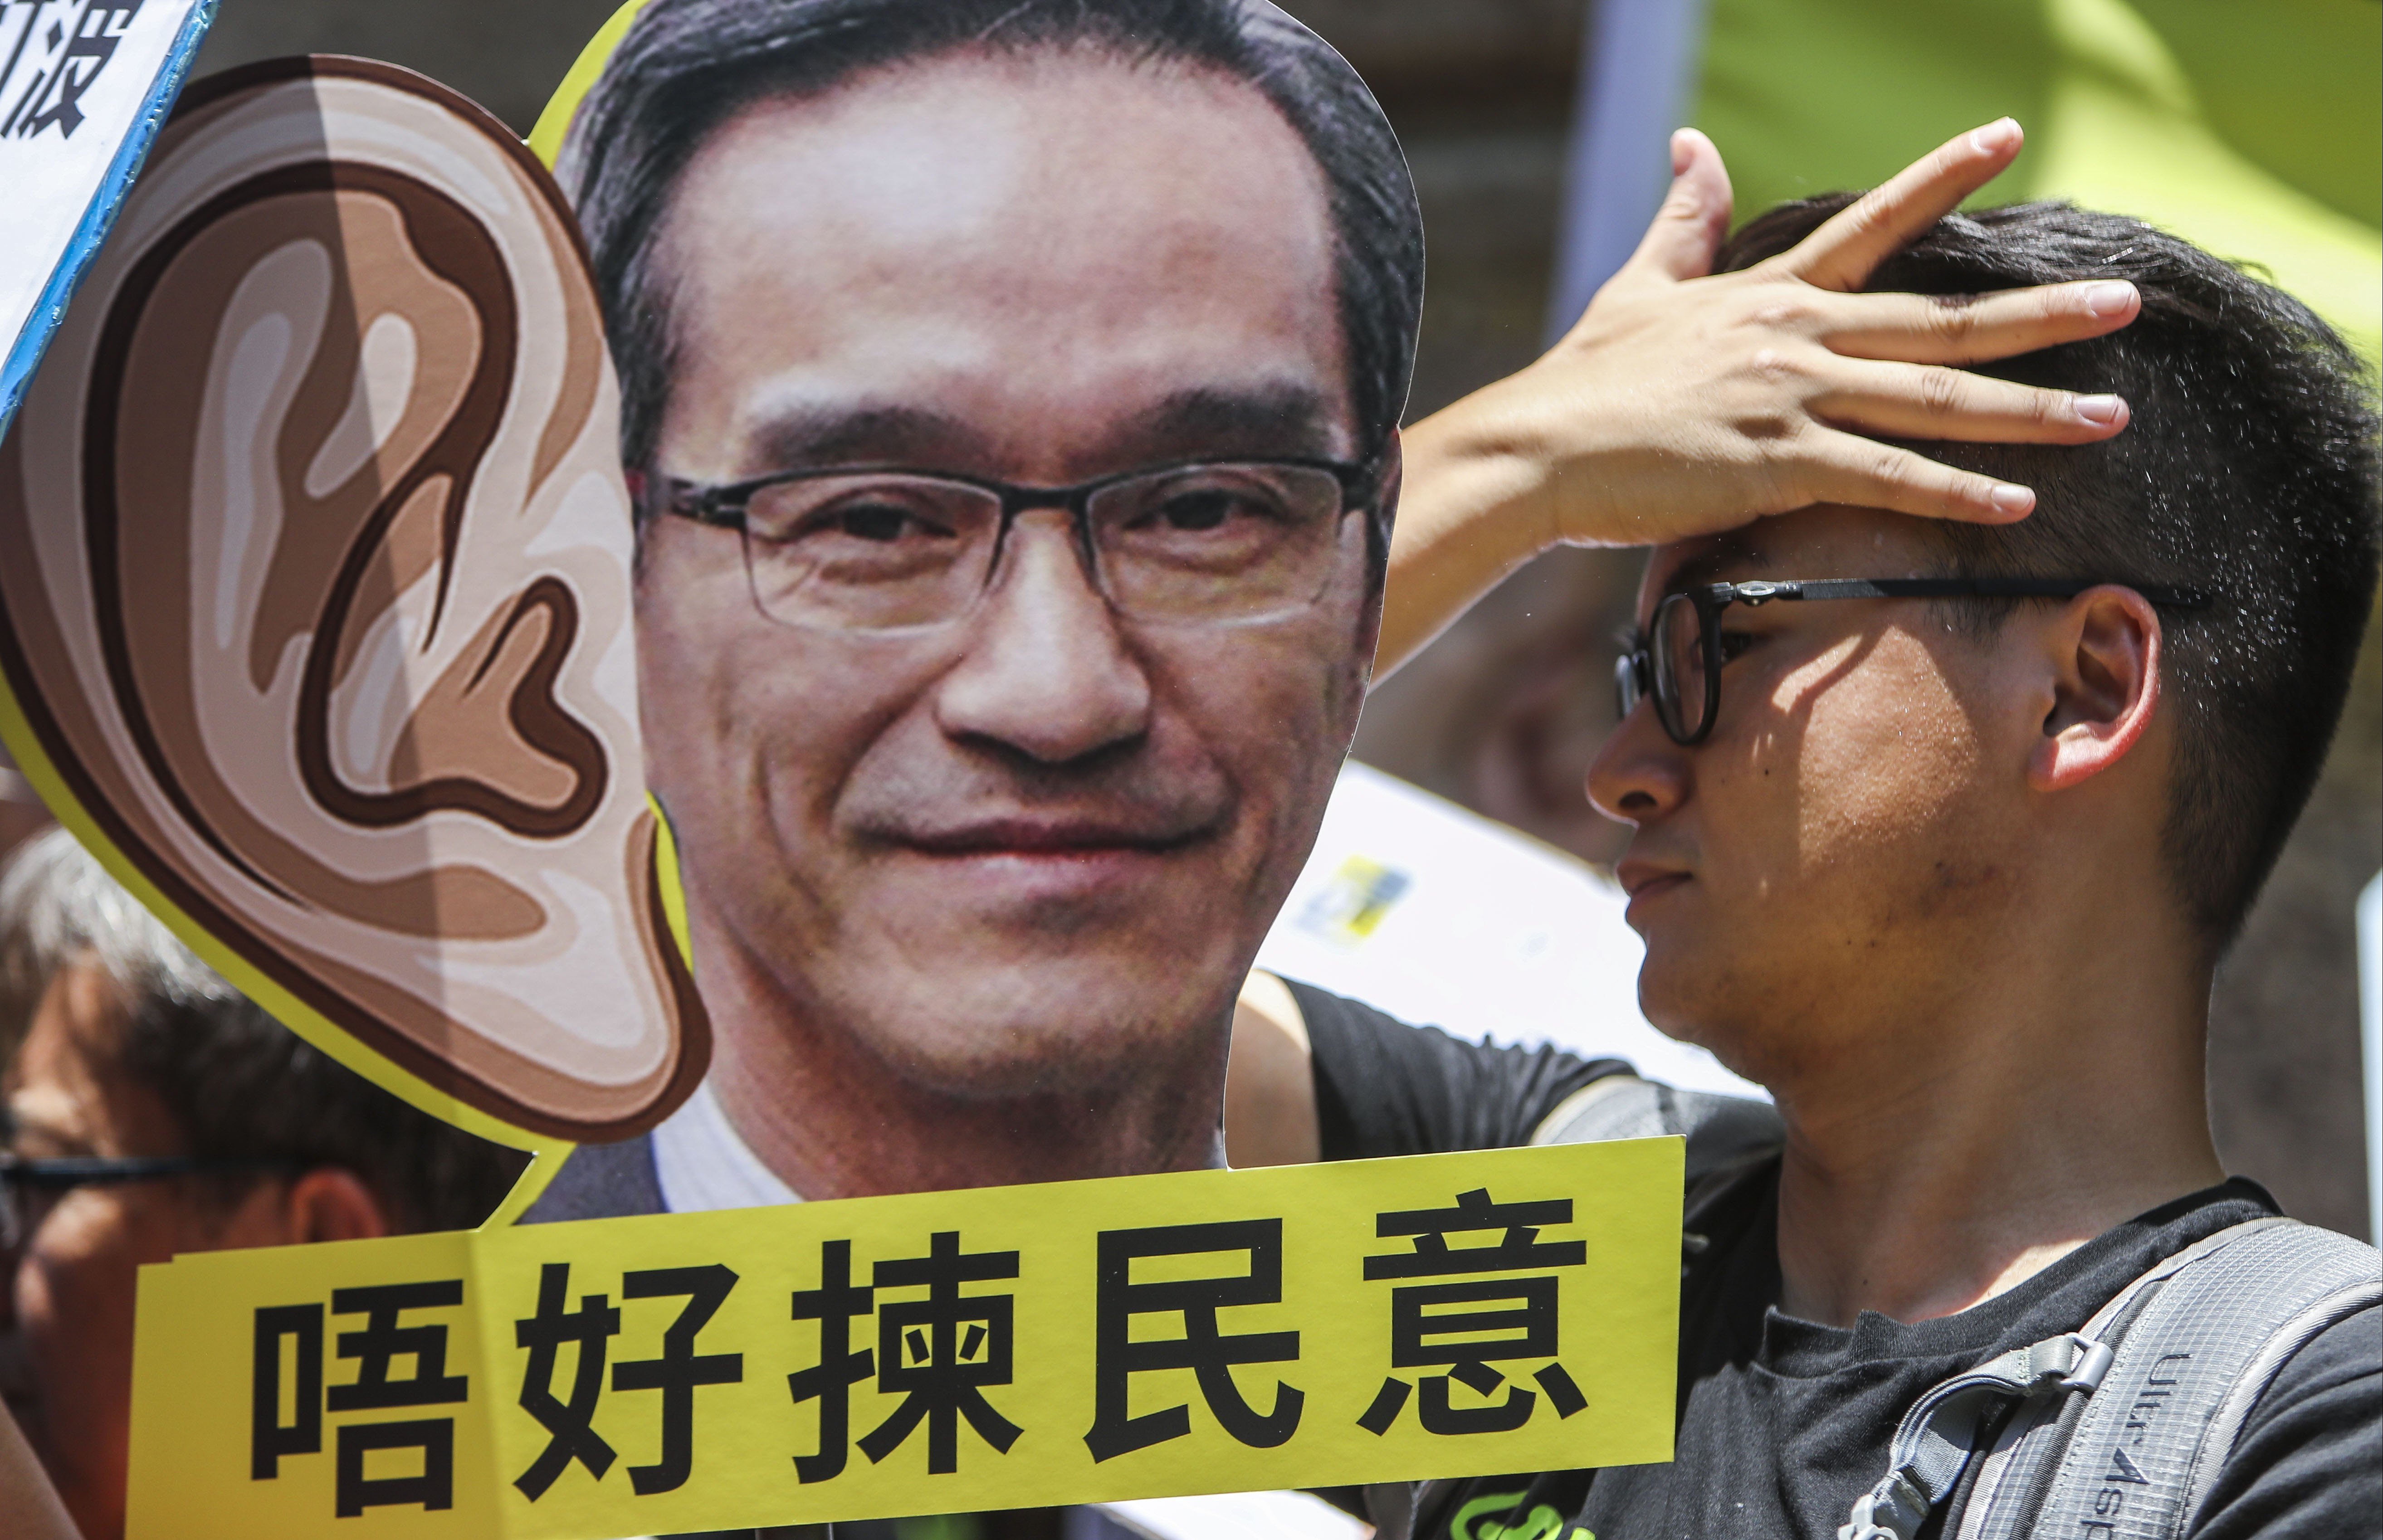 Protesters rally at the Leighton Hill Community Hall in Happy Valley during a public forum organised by the Task Force on Land Supply in June. The land supply public consultation is one of the most high-profile public engagement exercises held this year. Photo: Winson Wong